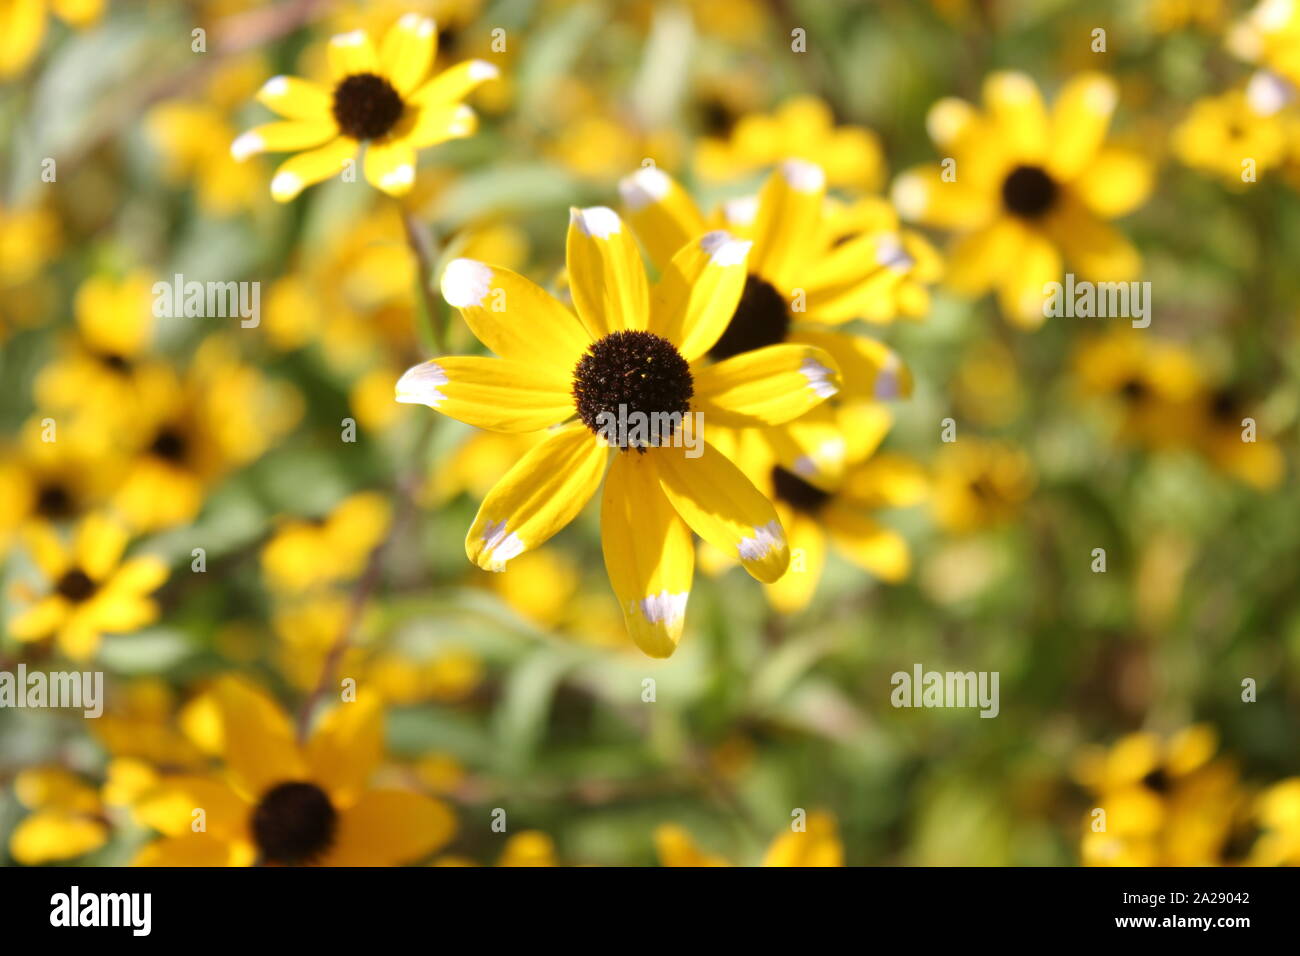 Meadow of black-eyed yellow sunhat or rudbeckian as high angle view. Stock Photo